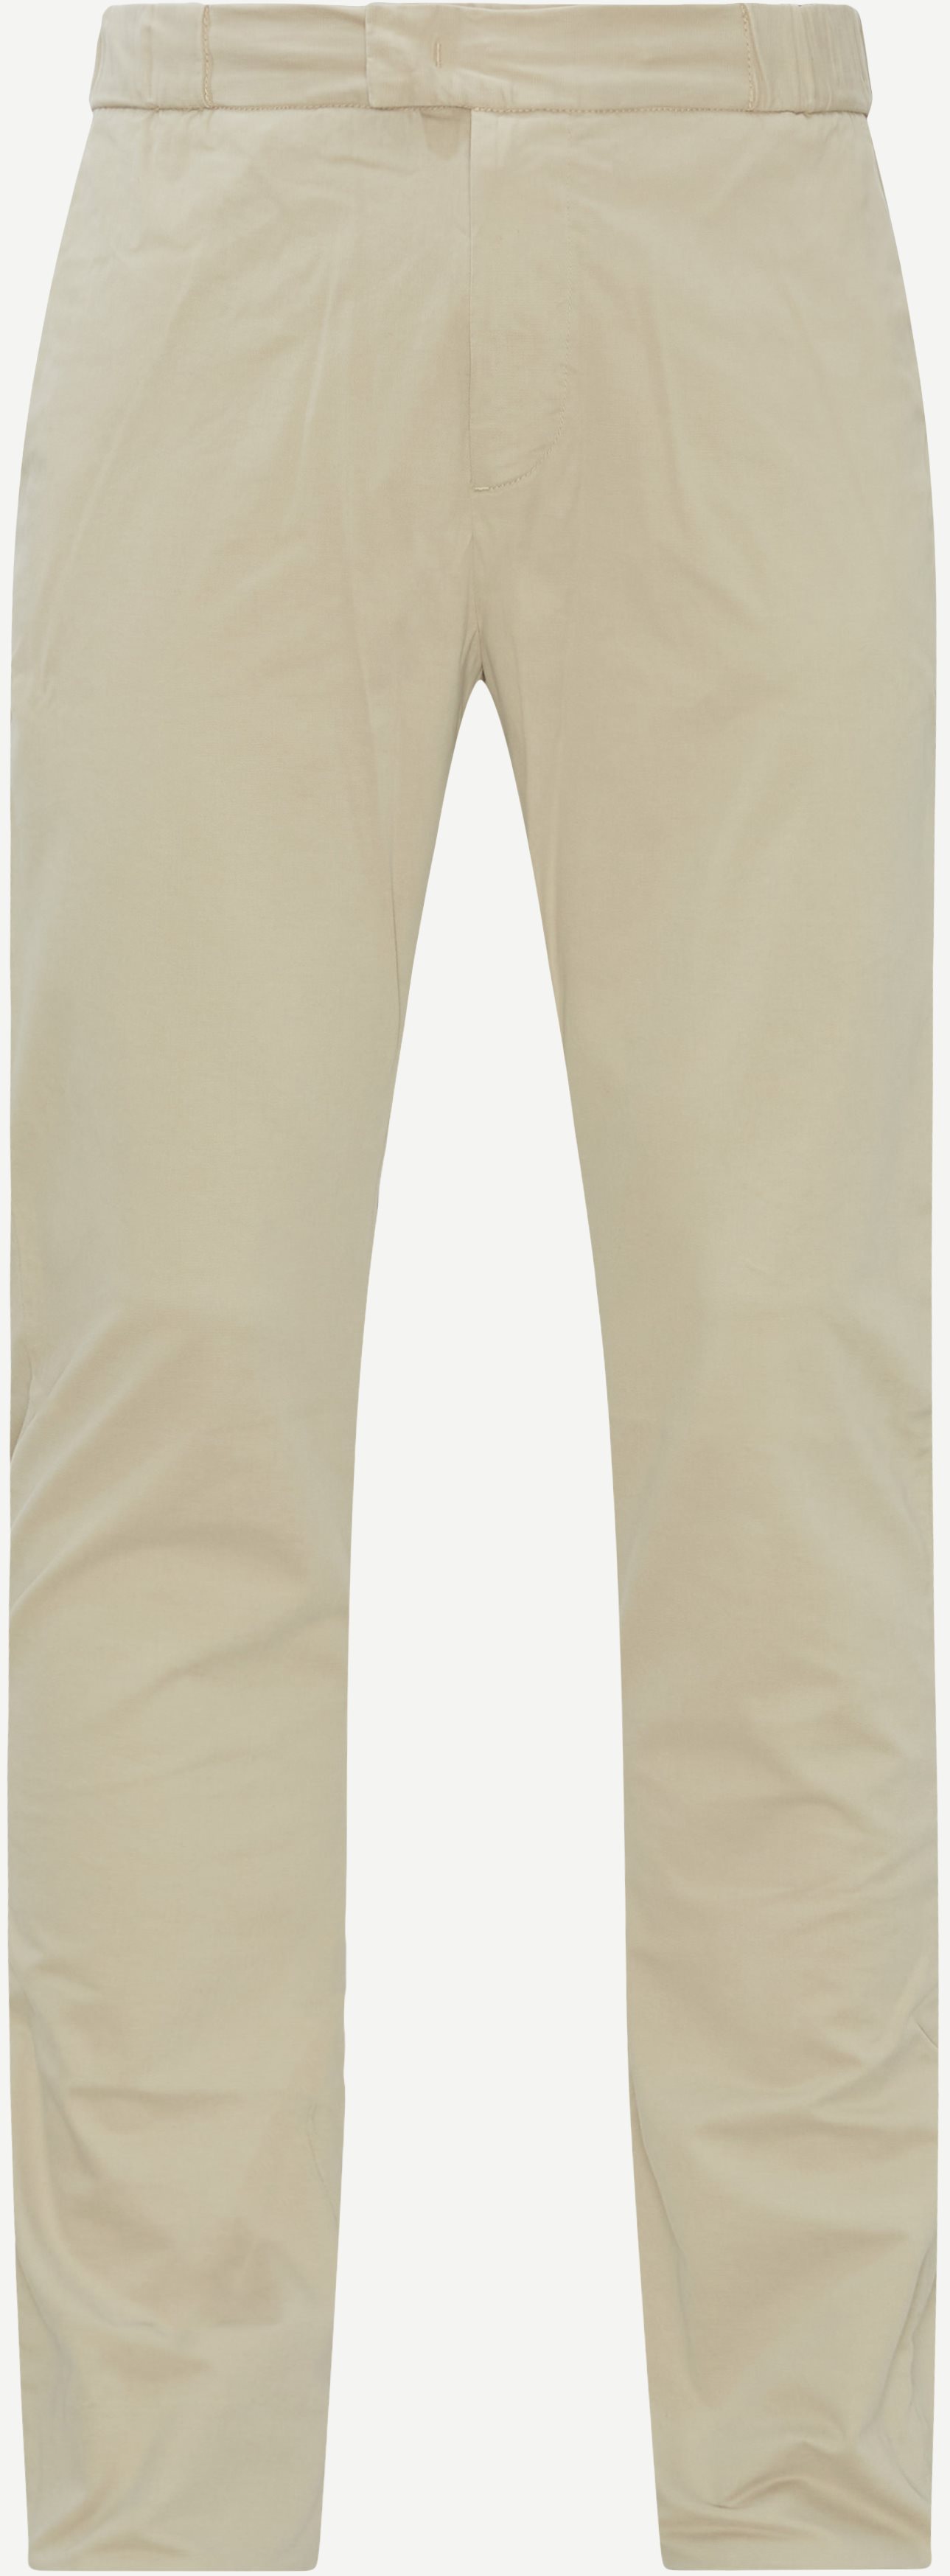 A.C.T. SOCIAL Trousers HARRY AS1028 Grey